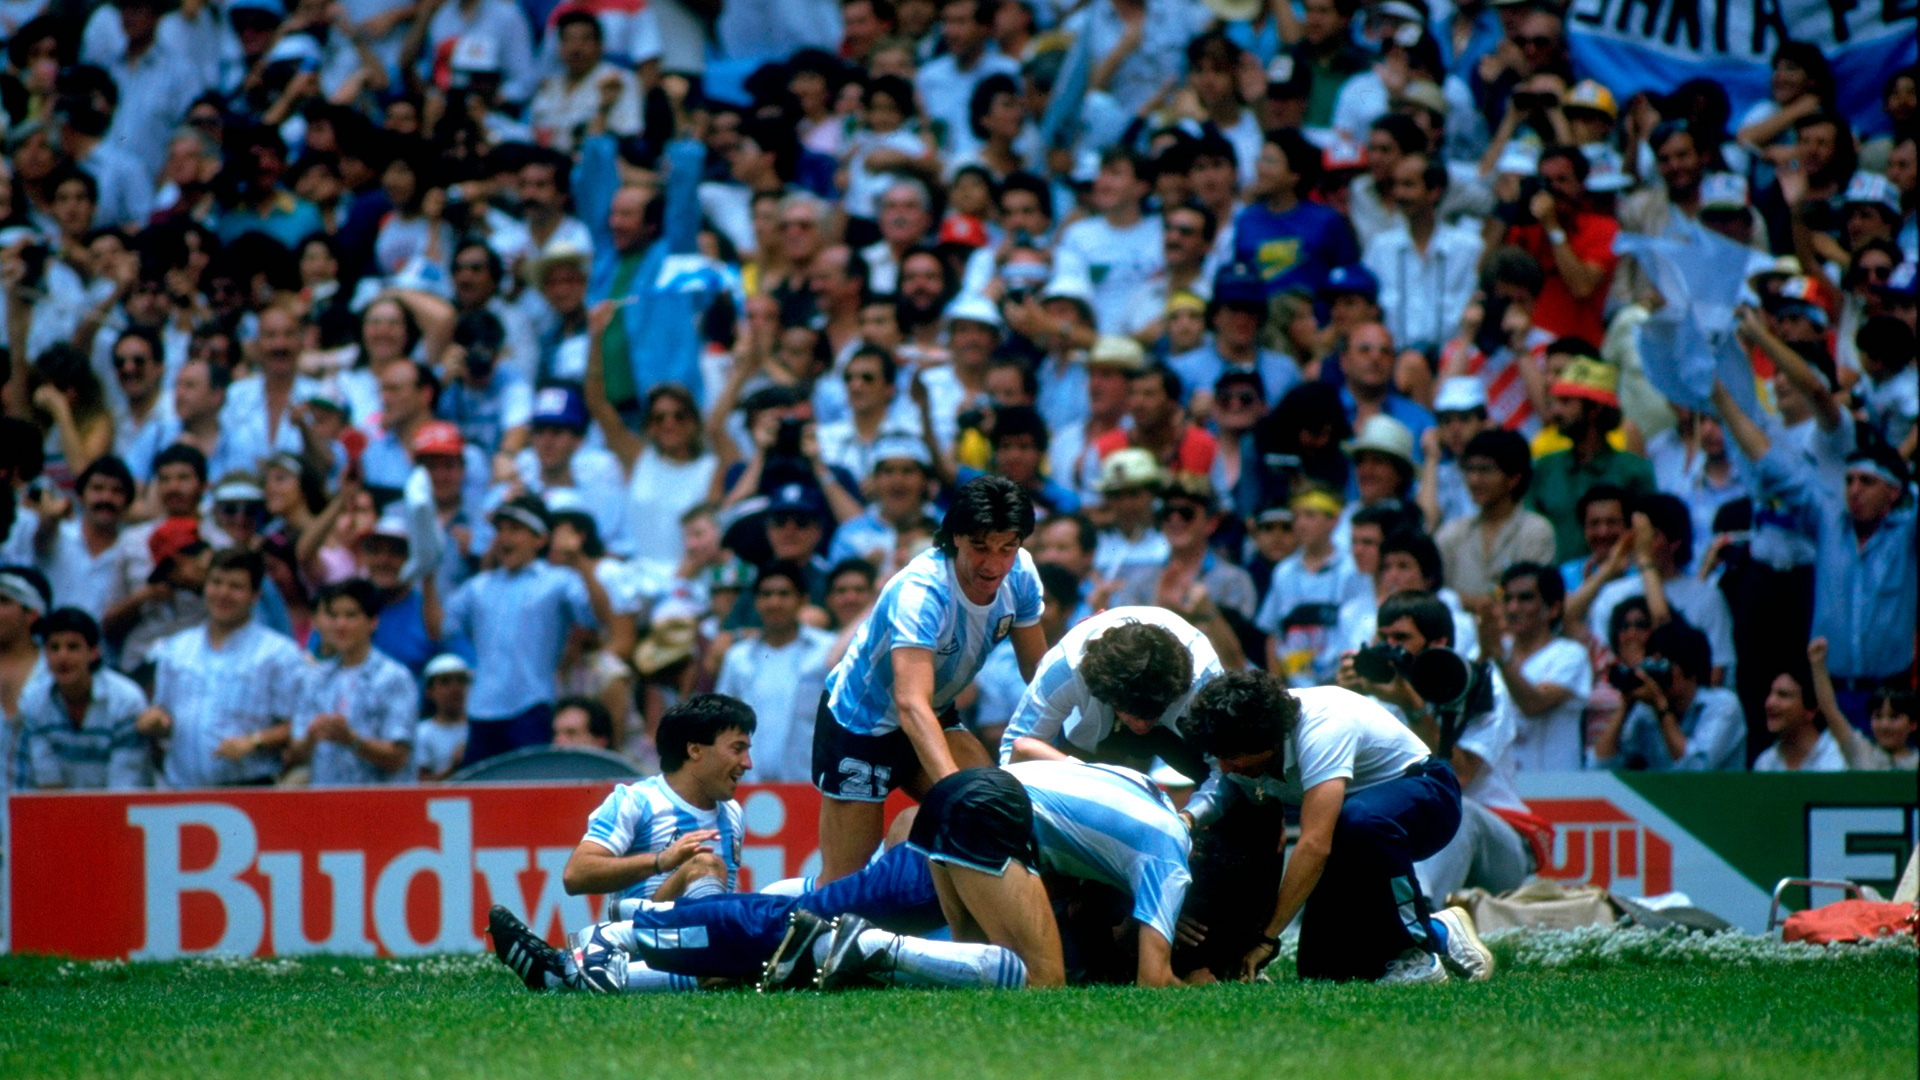 29 Jul 1986:  The Argentinian team celebrate after Burruchaga scores a goal during the World Cup Final match against West Germany at the Azteca Stadium in Mexico City. Argentina won the match 3-2. \ Mandatory Credit: Billy  Stickland/Allsport